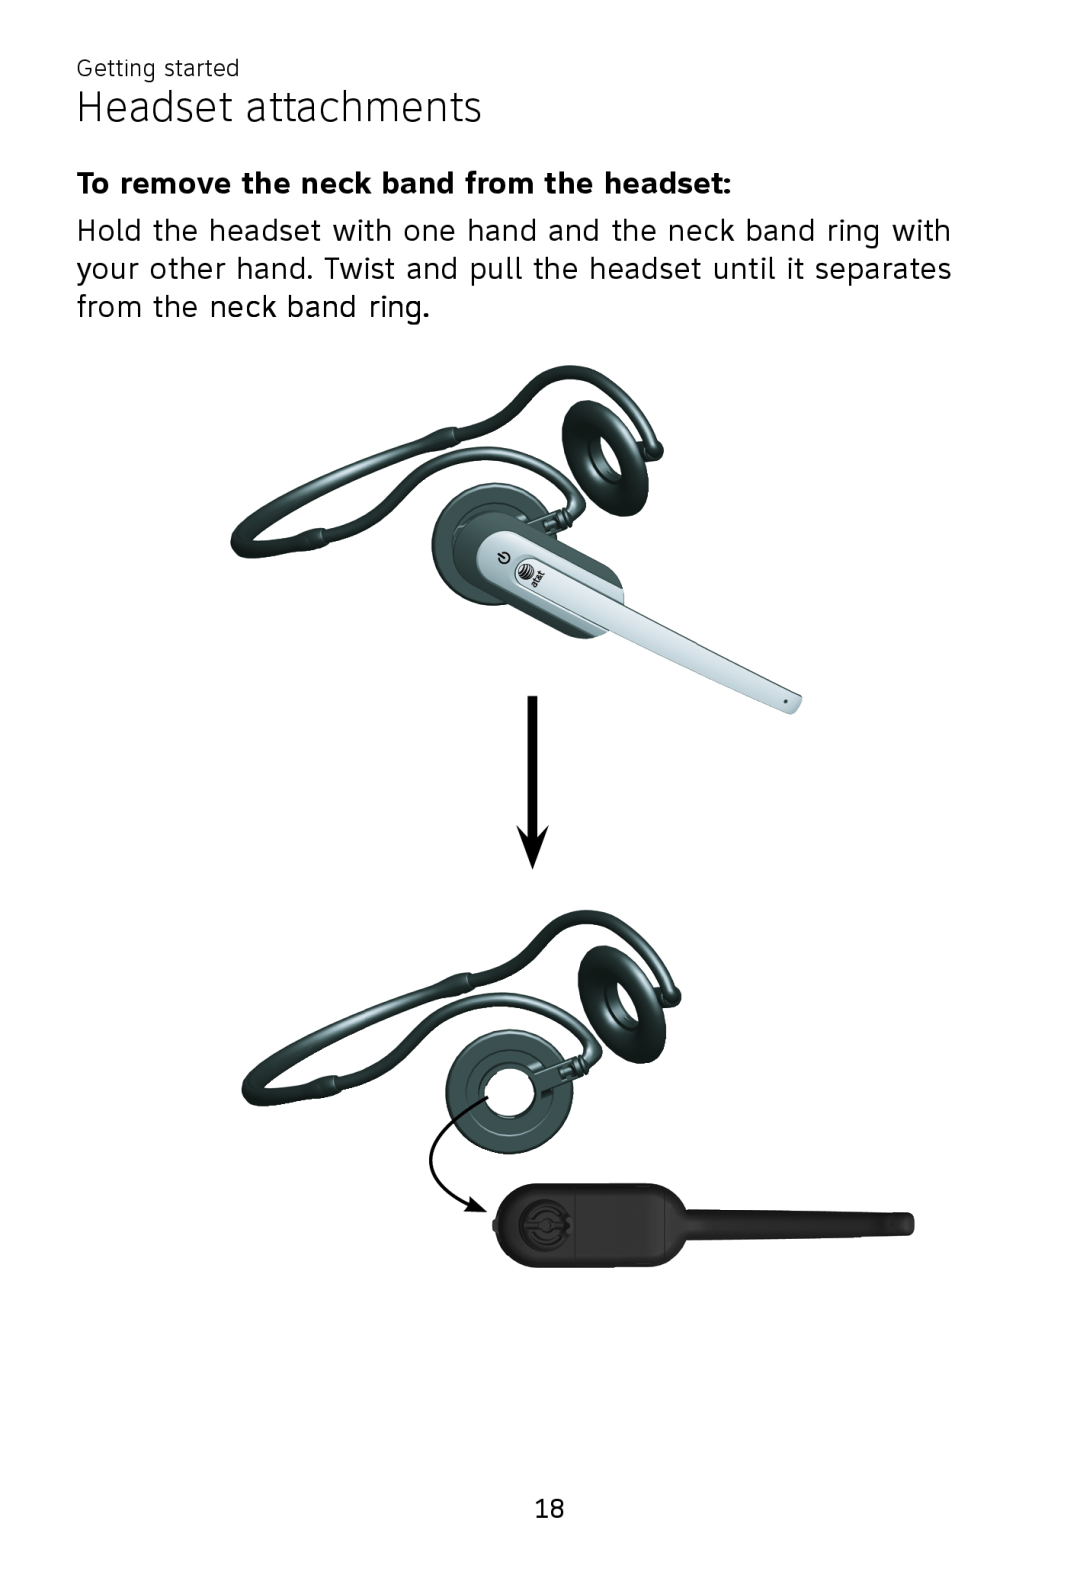 AT&T TL7700 user manual To remove the neck band from the headset, Headset attachments 